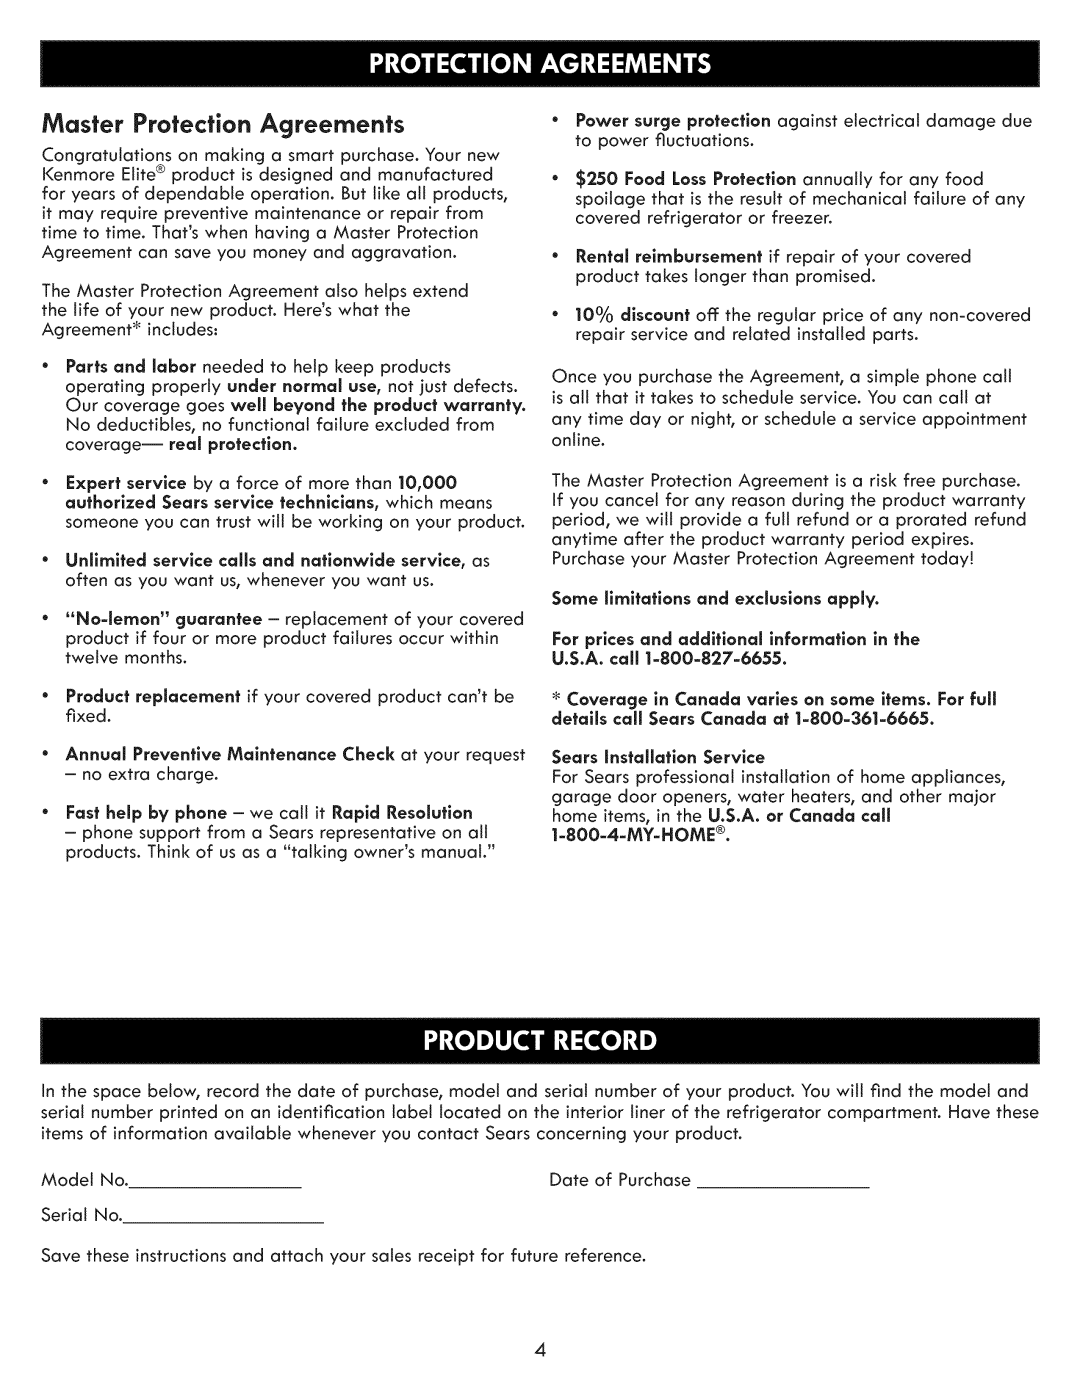 Kenmore 795.7205 manual Master Protection Agreements, Sears Installation Service, My-Home 